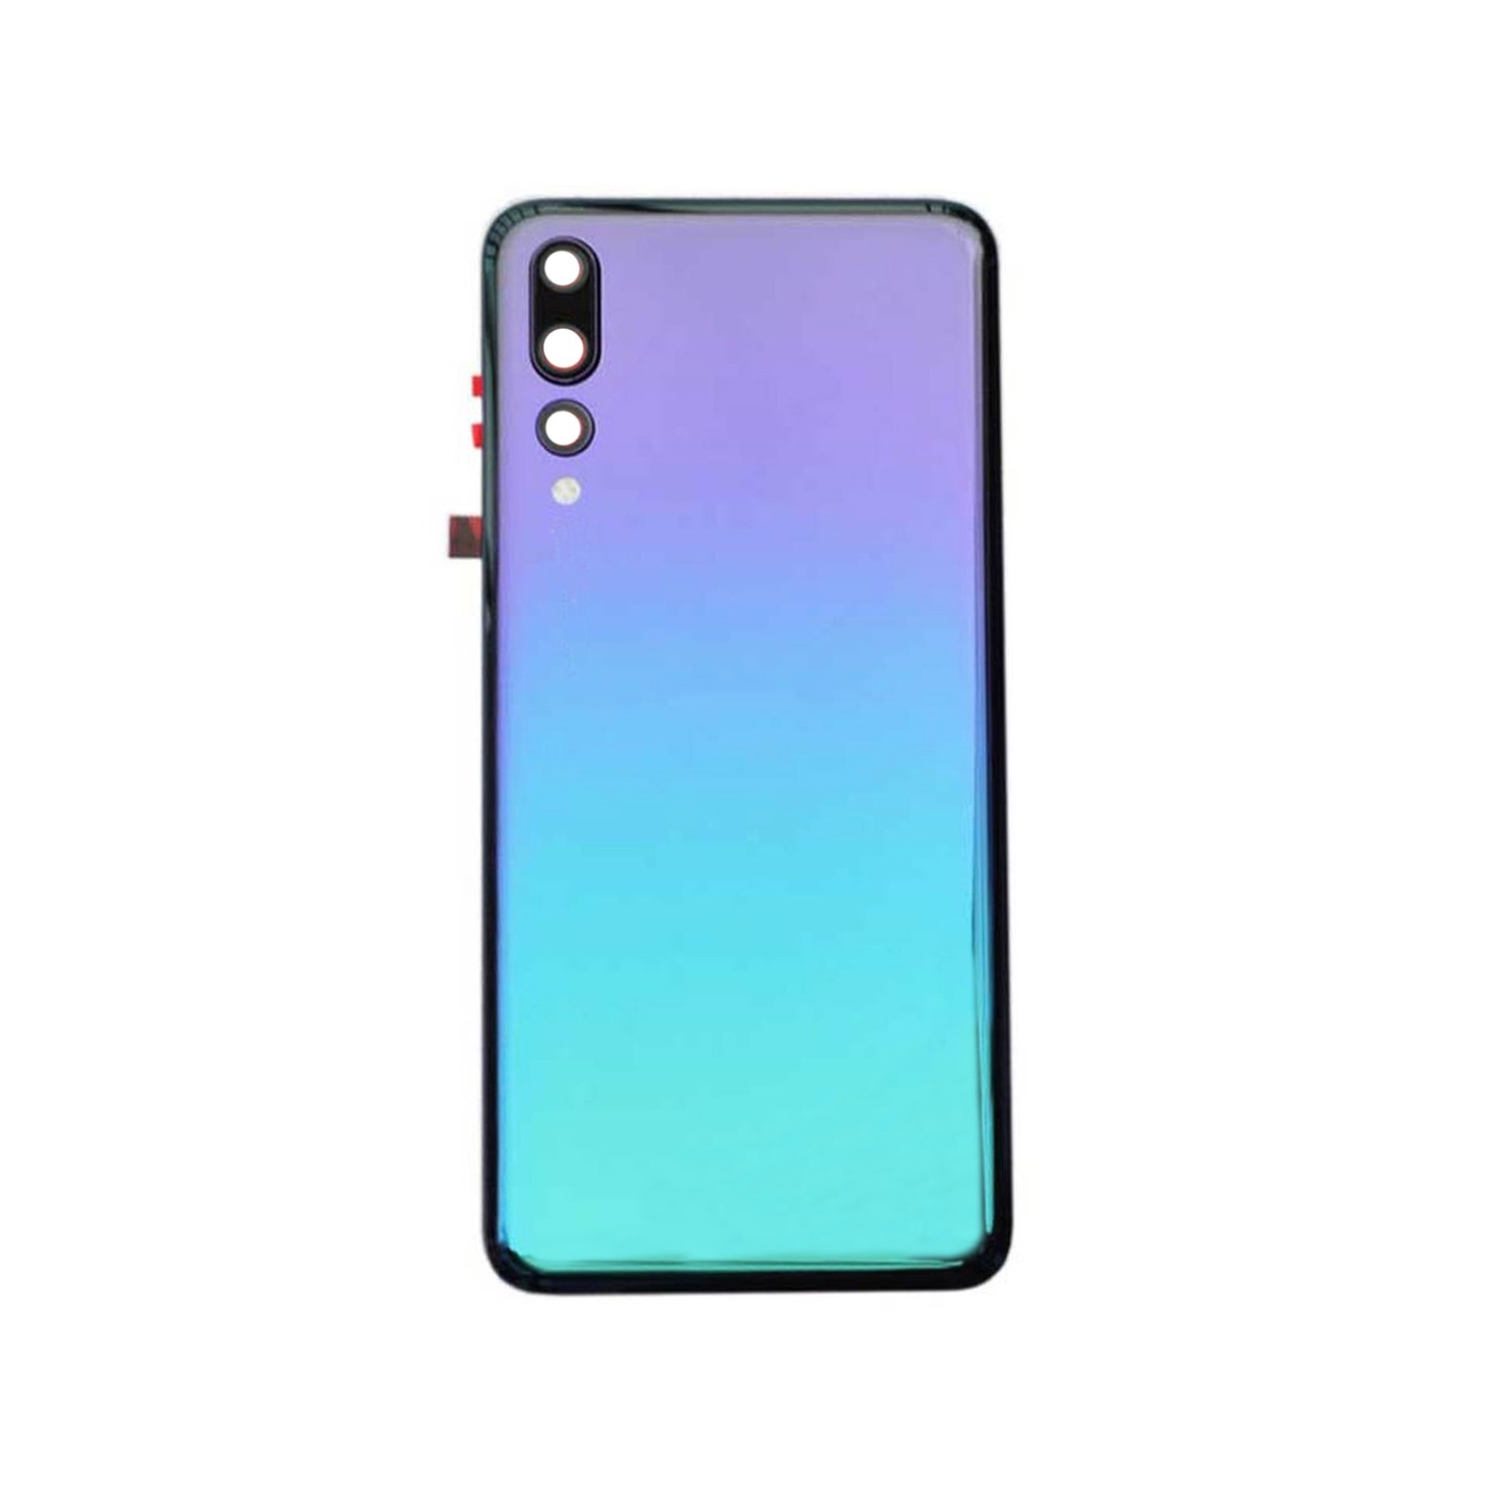 Replacement Back Housing Cover + Camera Lens For Huawei P20 Pro - Twilight